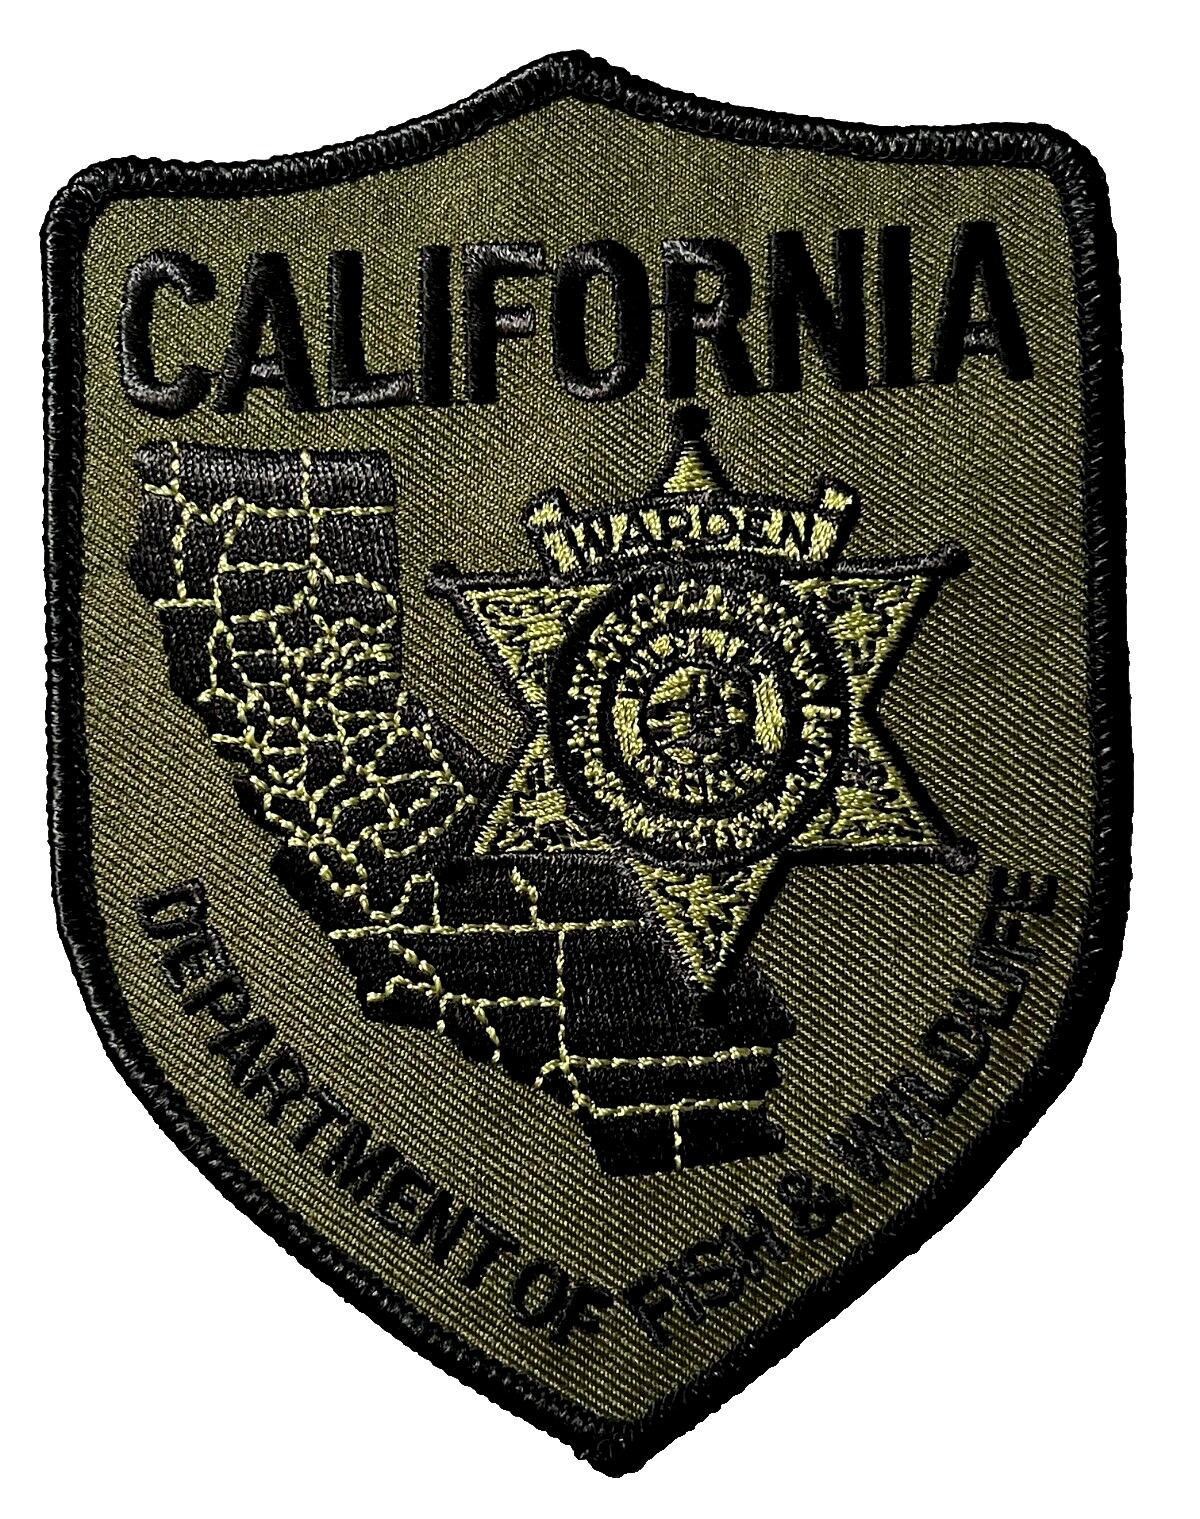 CALIFORNIA FISH & WILDLIFE GAME WARDEN 5" SSI PATCH (SPC 8) GREEN SUBDUED